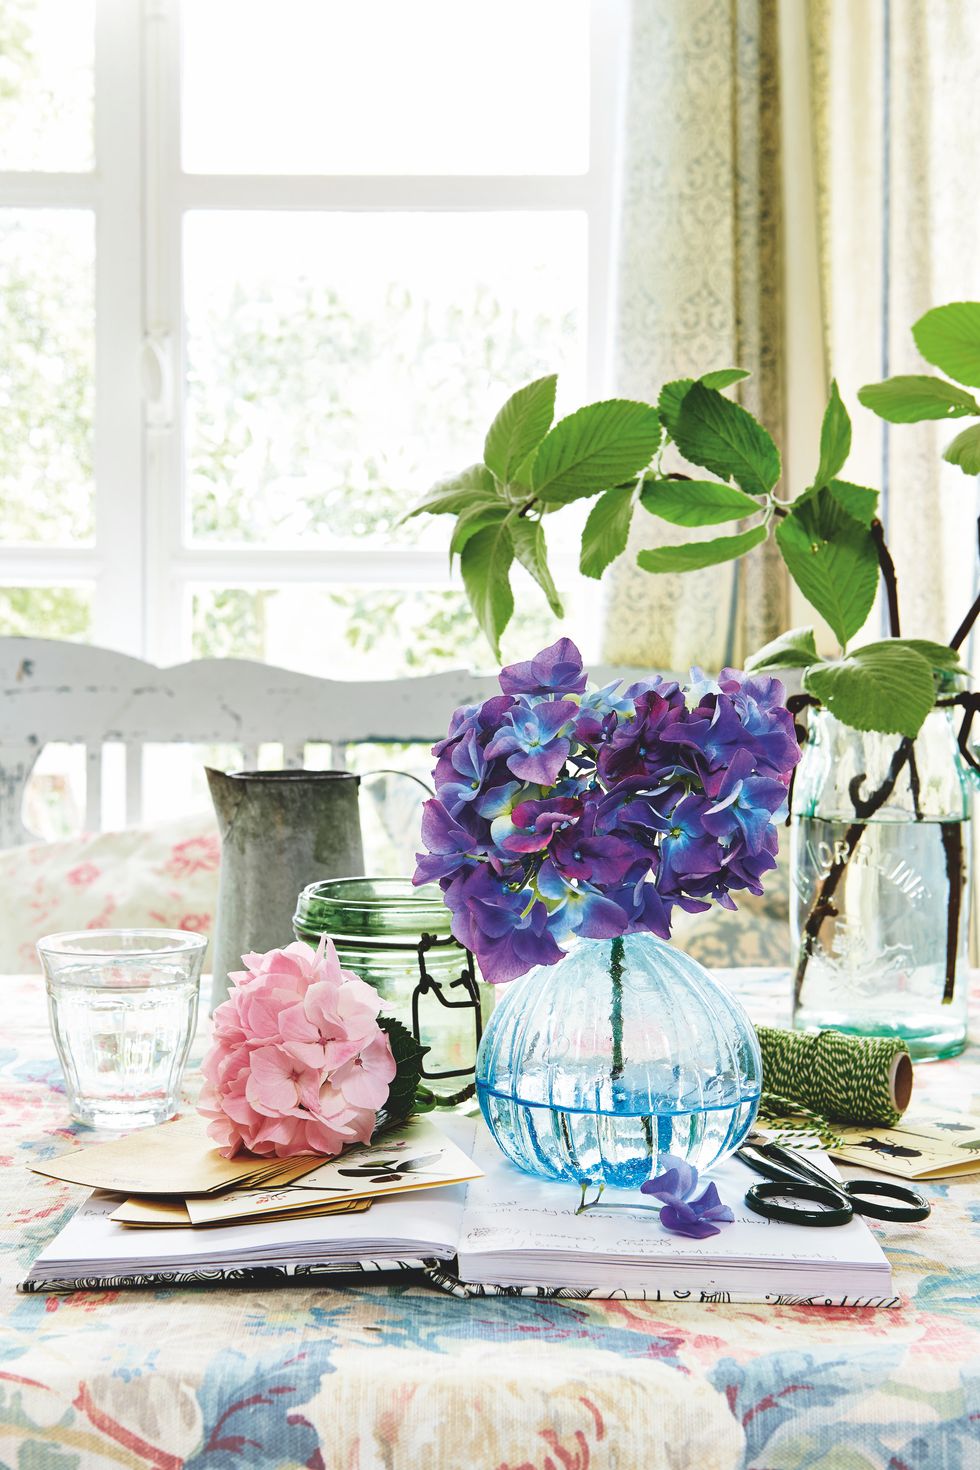 blue and pink hydrangea flowers, blue glass vase, scrap book, branches wtih foliage, leaves, vases, floral pattern tablecloth, summer, flower arranging